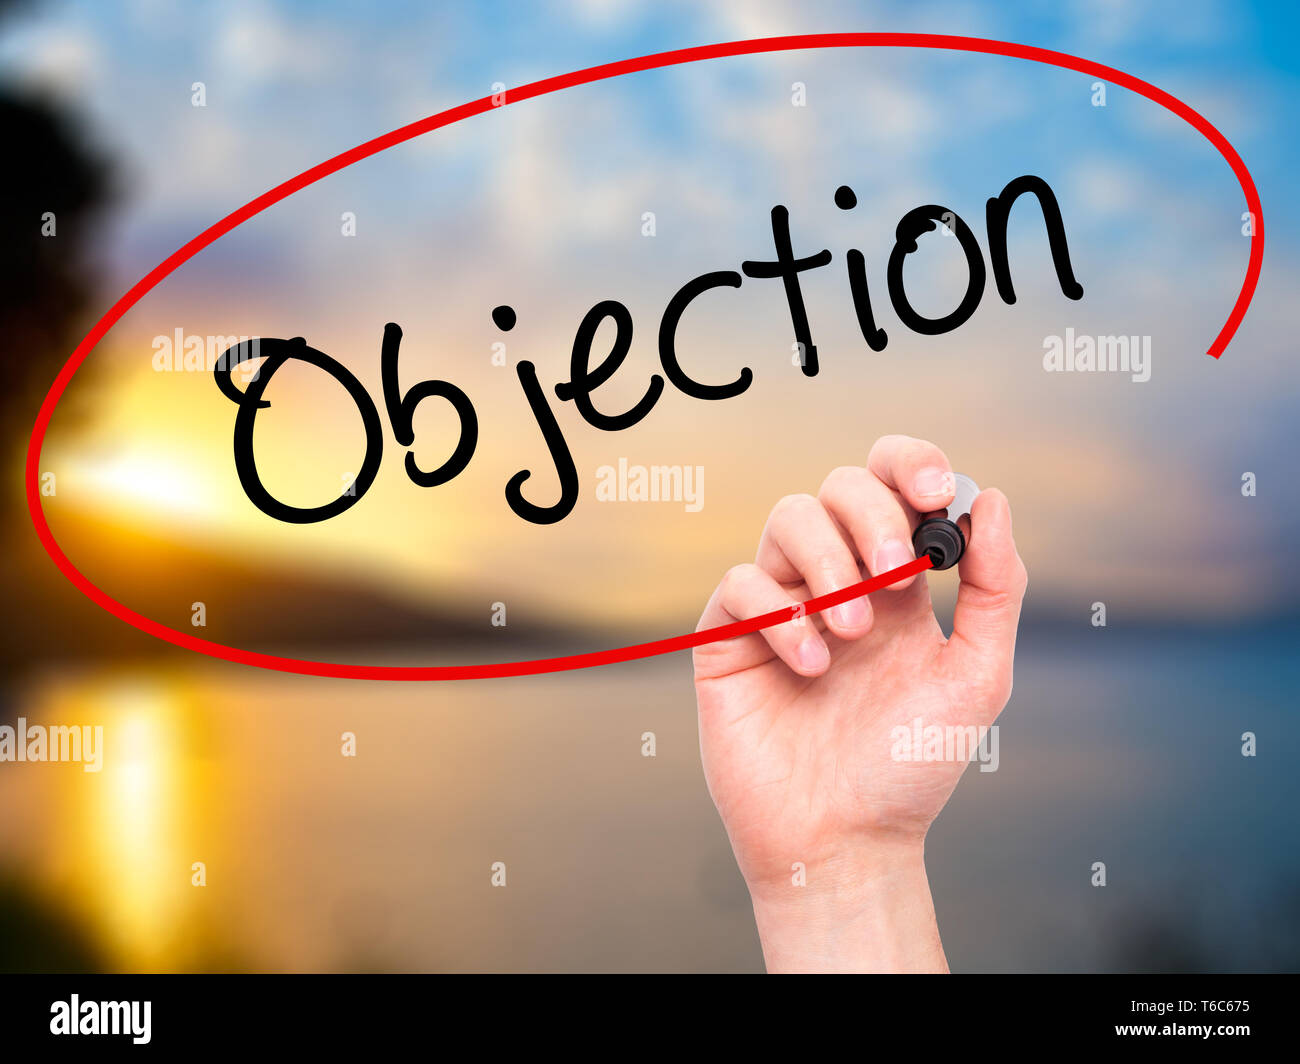 Man Hand writing Objection with black marker on visual screen Stock Photo